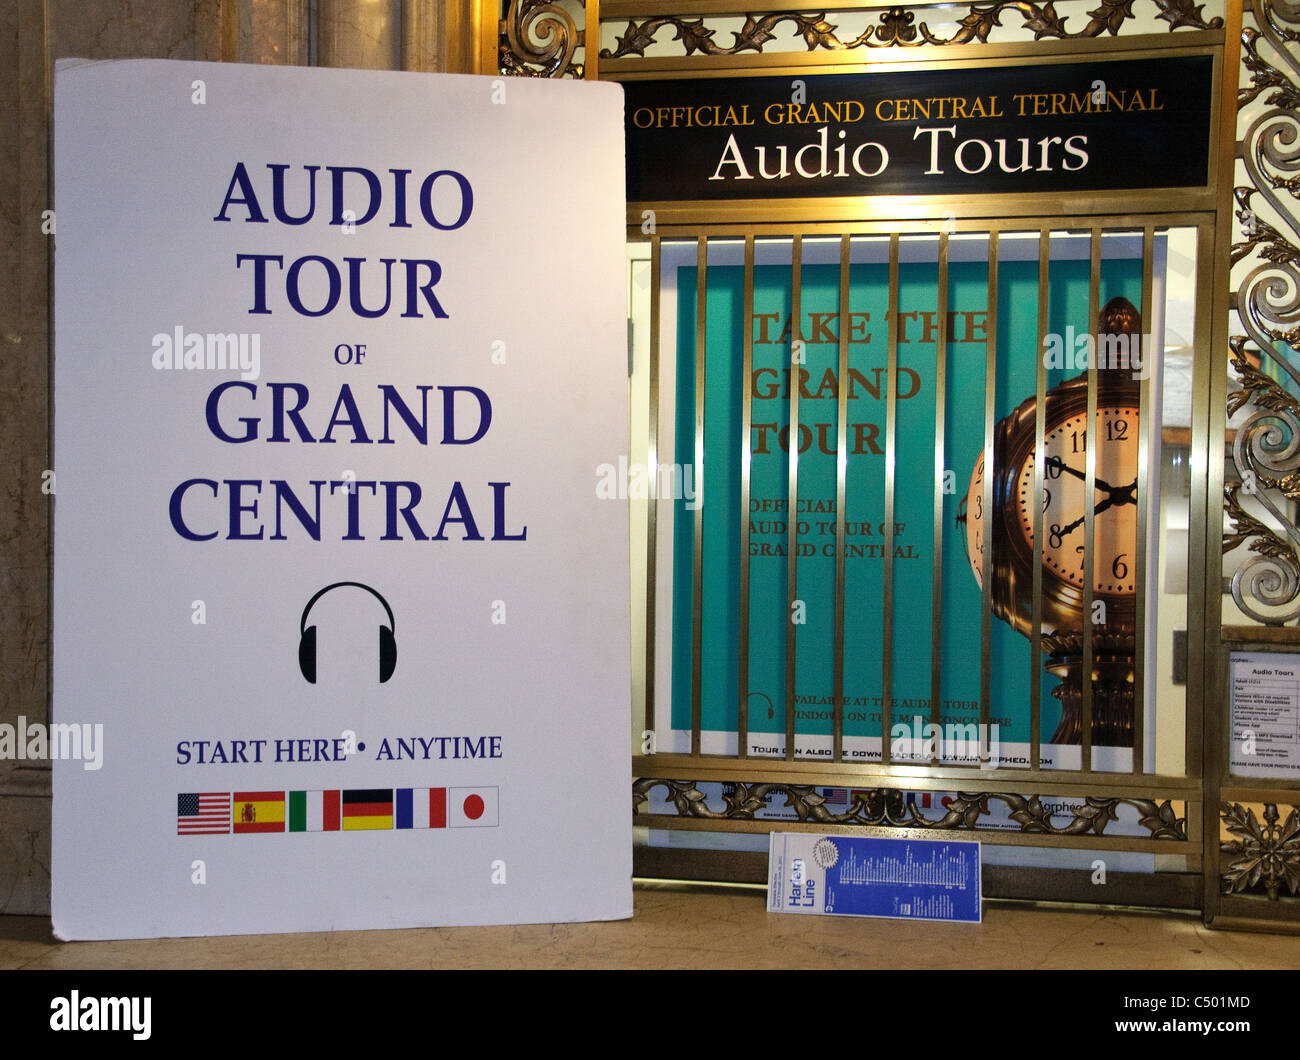 Grand Central Terminal, 42nd Street, New York City, Audio Tour of Terminal poster Stock Photo